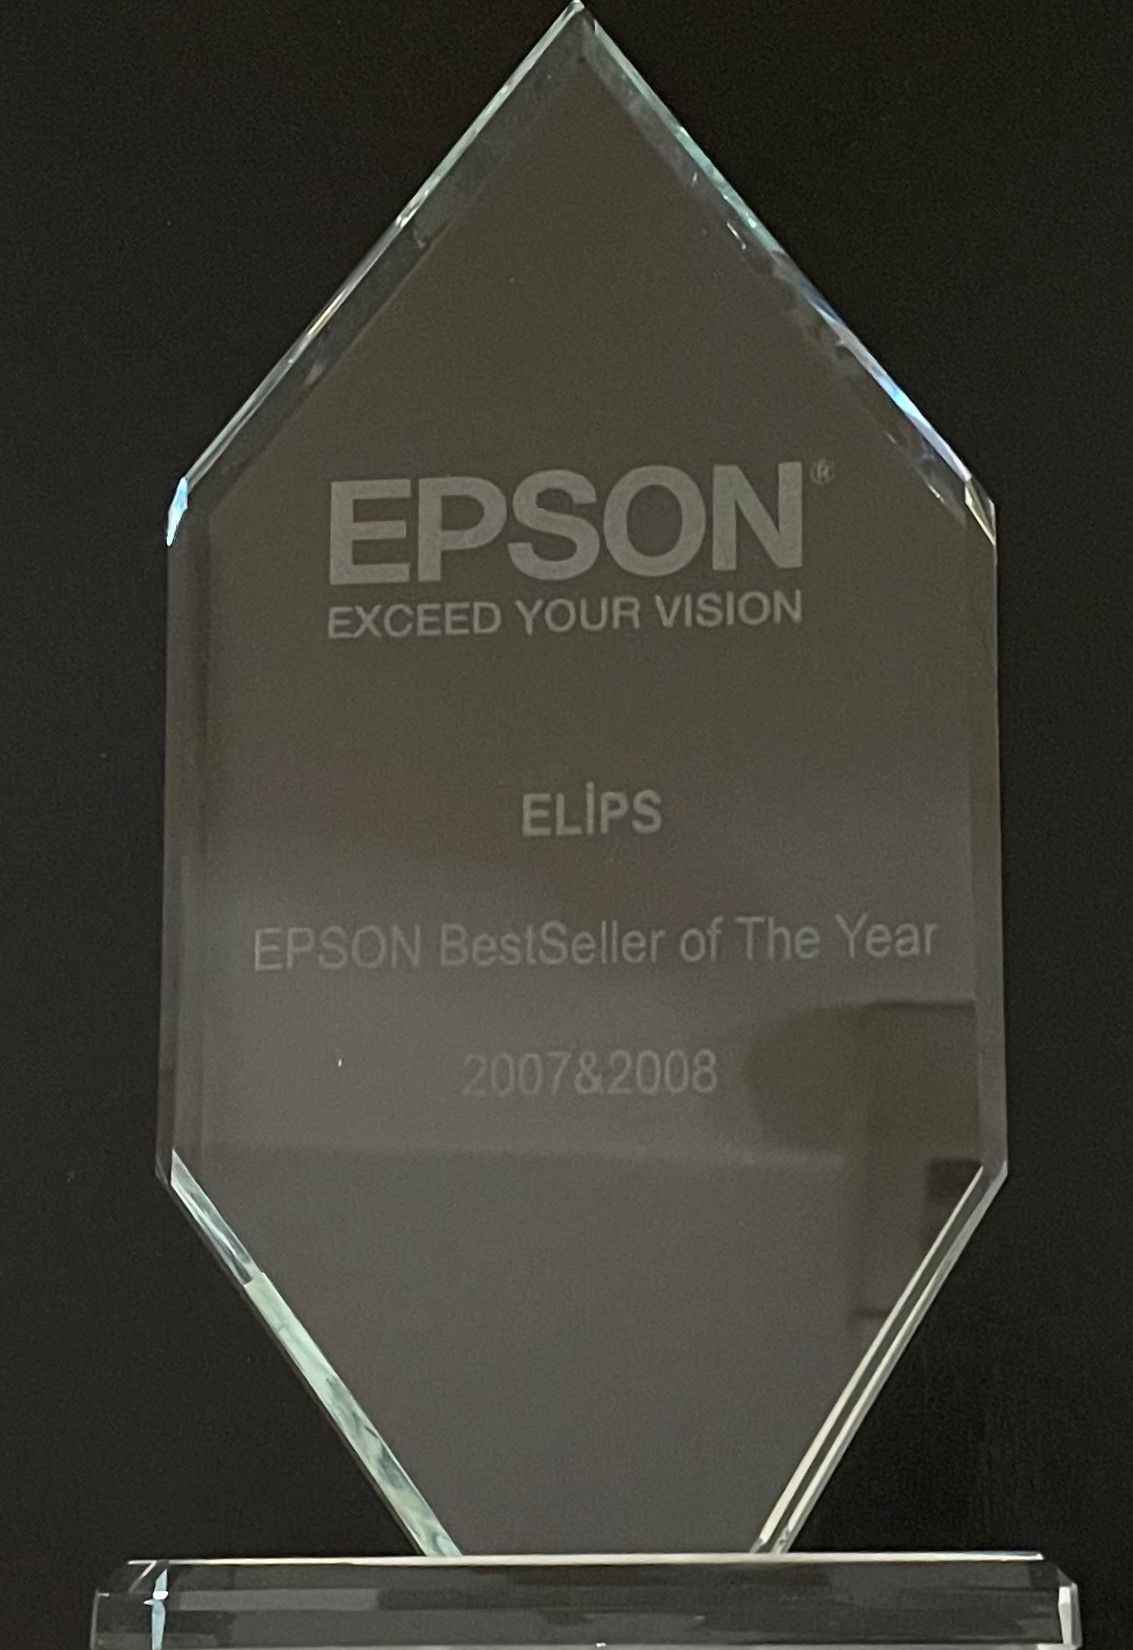 Elips Epson Best Seller of The Year 2007/2008